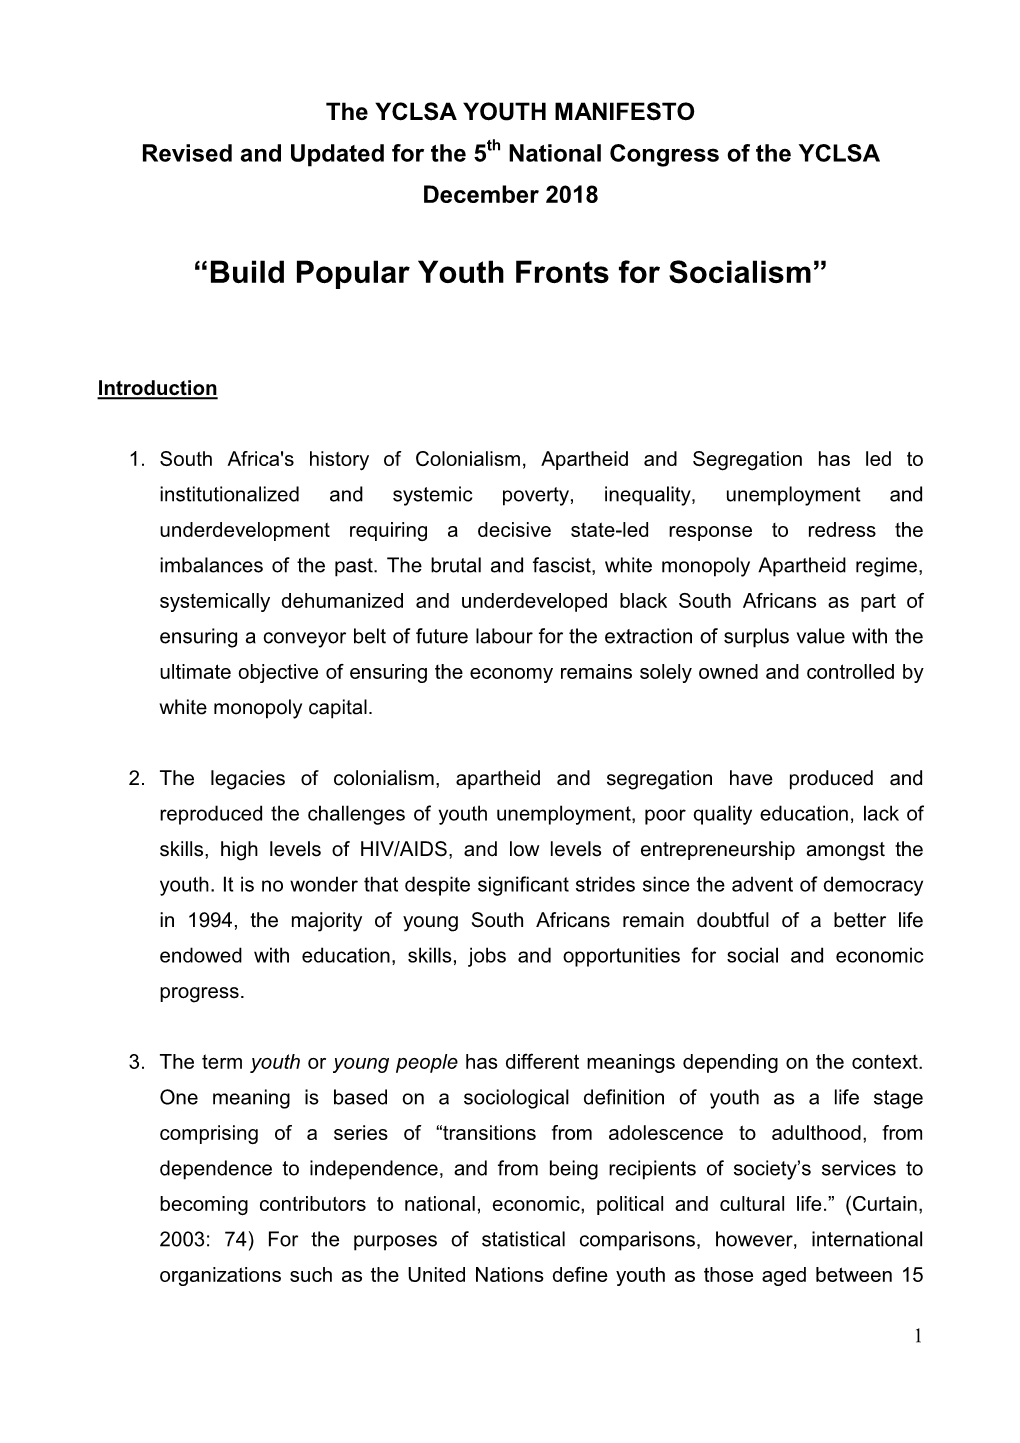 “Build Popular Youth Fronts for Socialism”